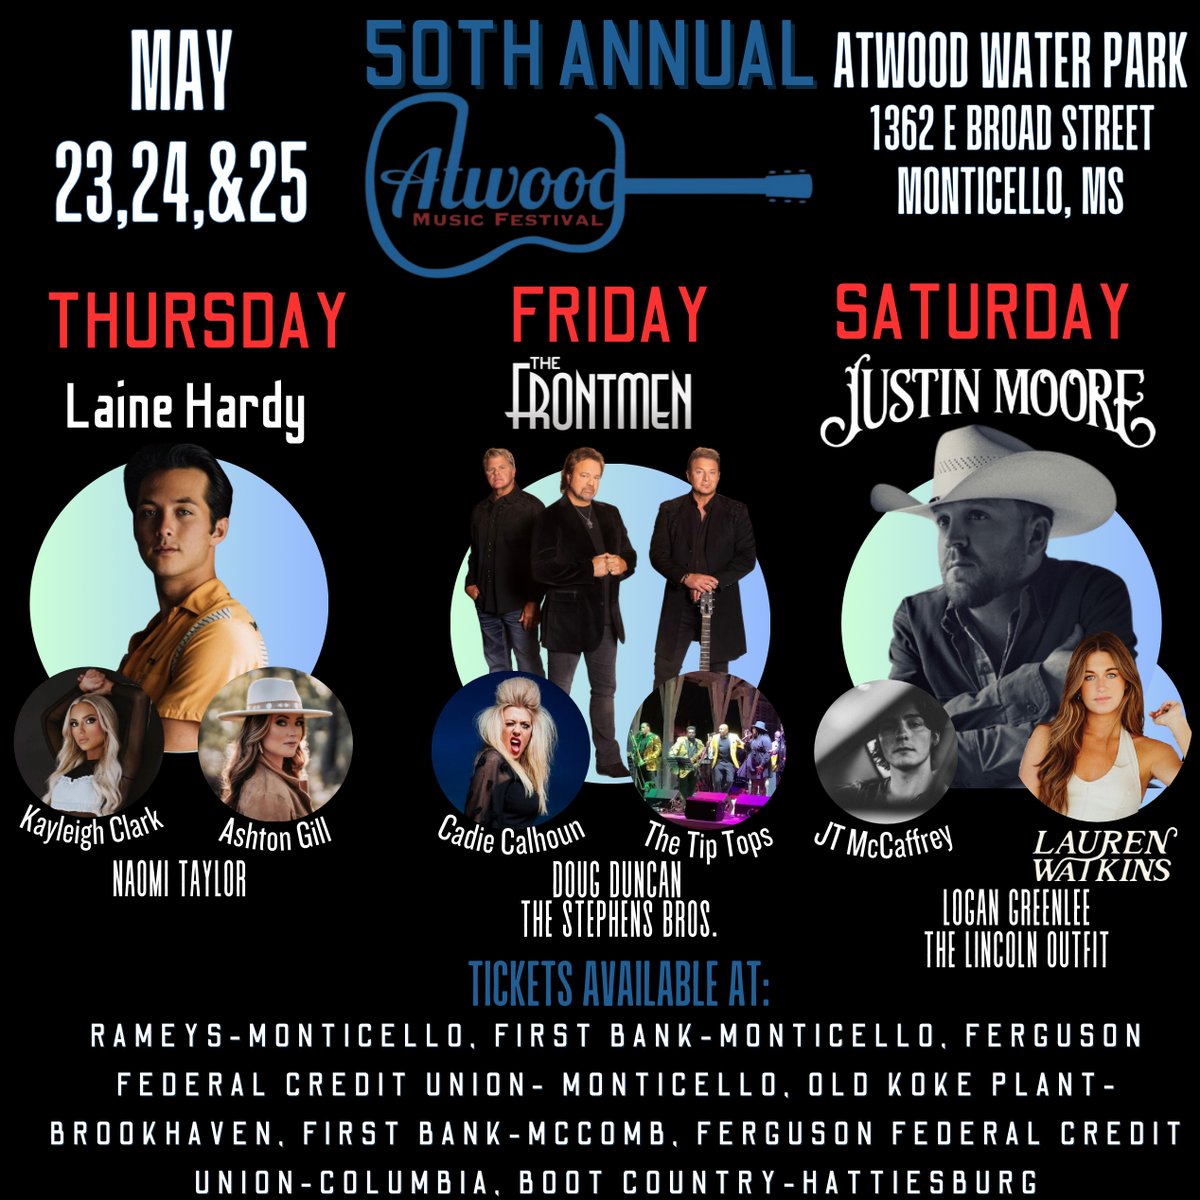 Catch us this Friday at the 50th Annual @AtwoodMusicFest 📌 Monticello, MS 📅 May 24th 🎫 thefrontmenlive.com/shows/ #upcomingshow #Monticello #countrymusic #thefrontmen #BMGNashville #richiemcdonald #larrystewart #timrushlow